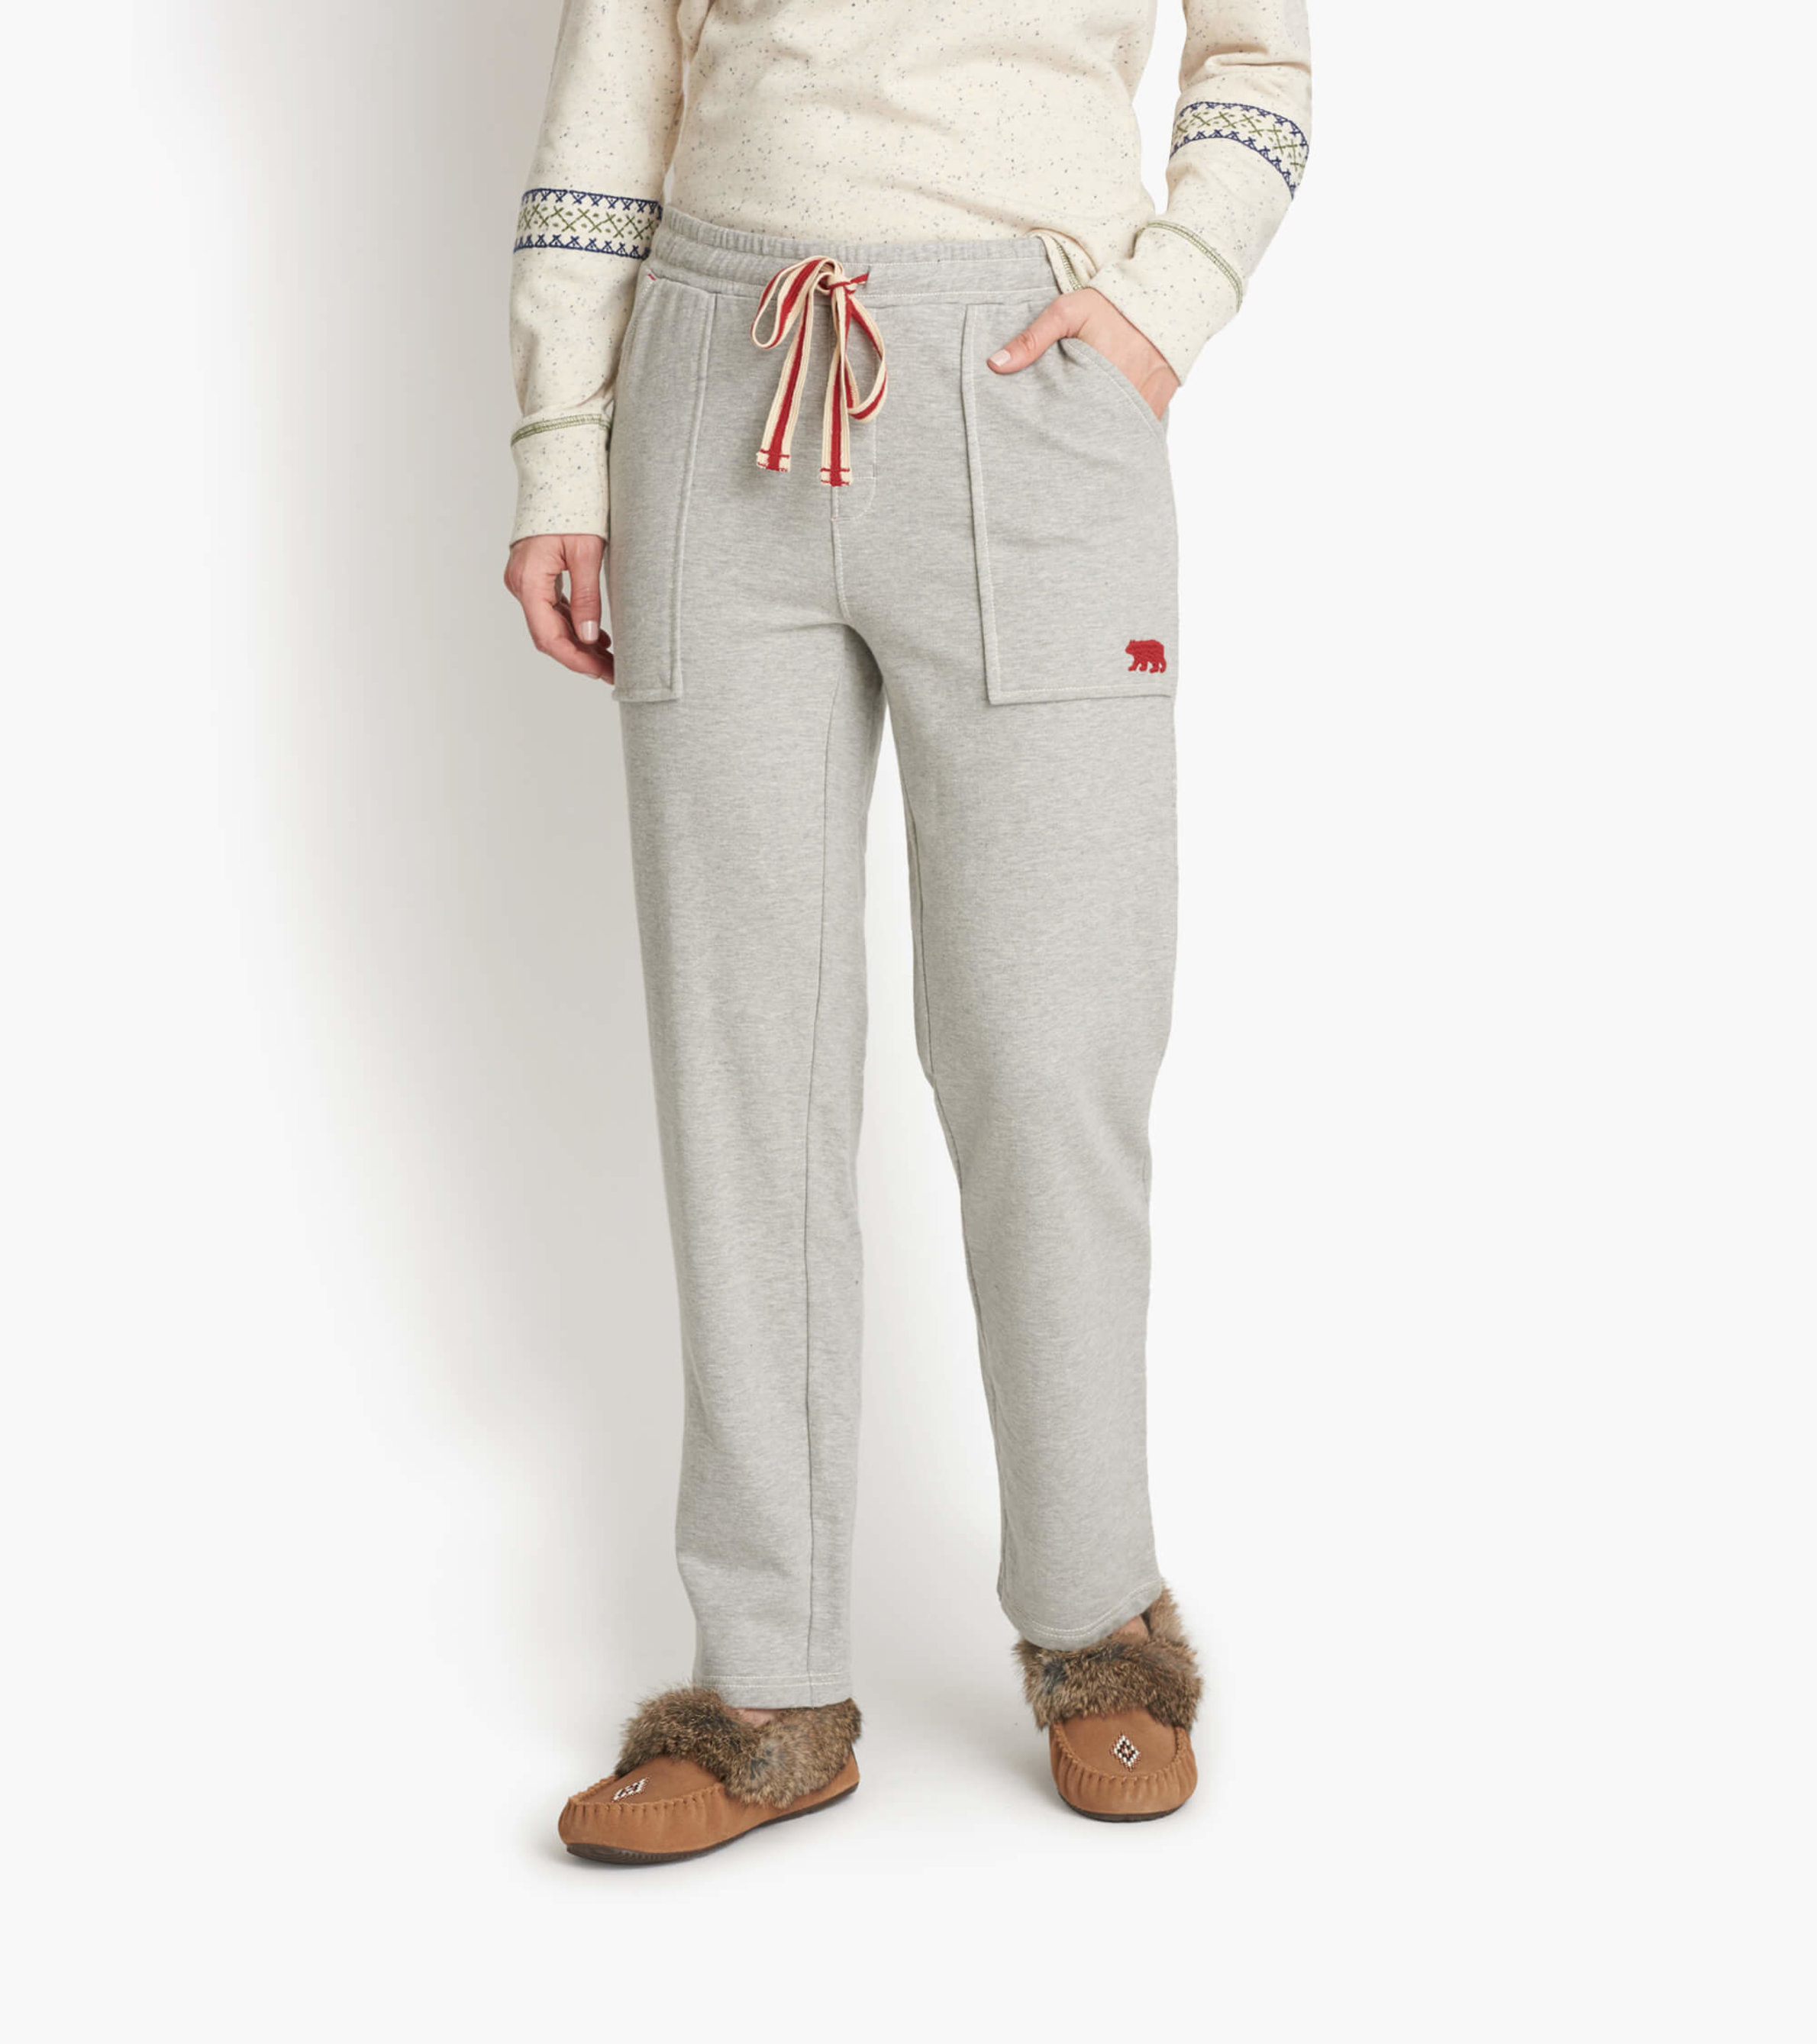 https://cdn.littlebluehouse.com/product_images/grey-womens-heritage-joggers/PAPGRAY217_jpg/pdp_zoom.jpg?c=1587592069&locale=en